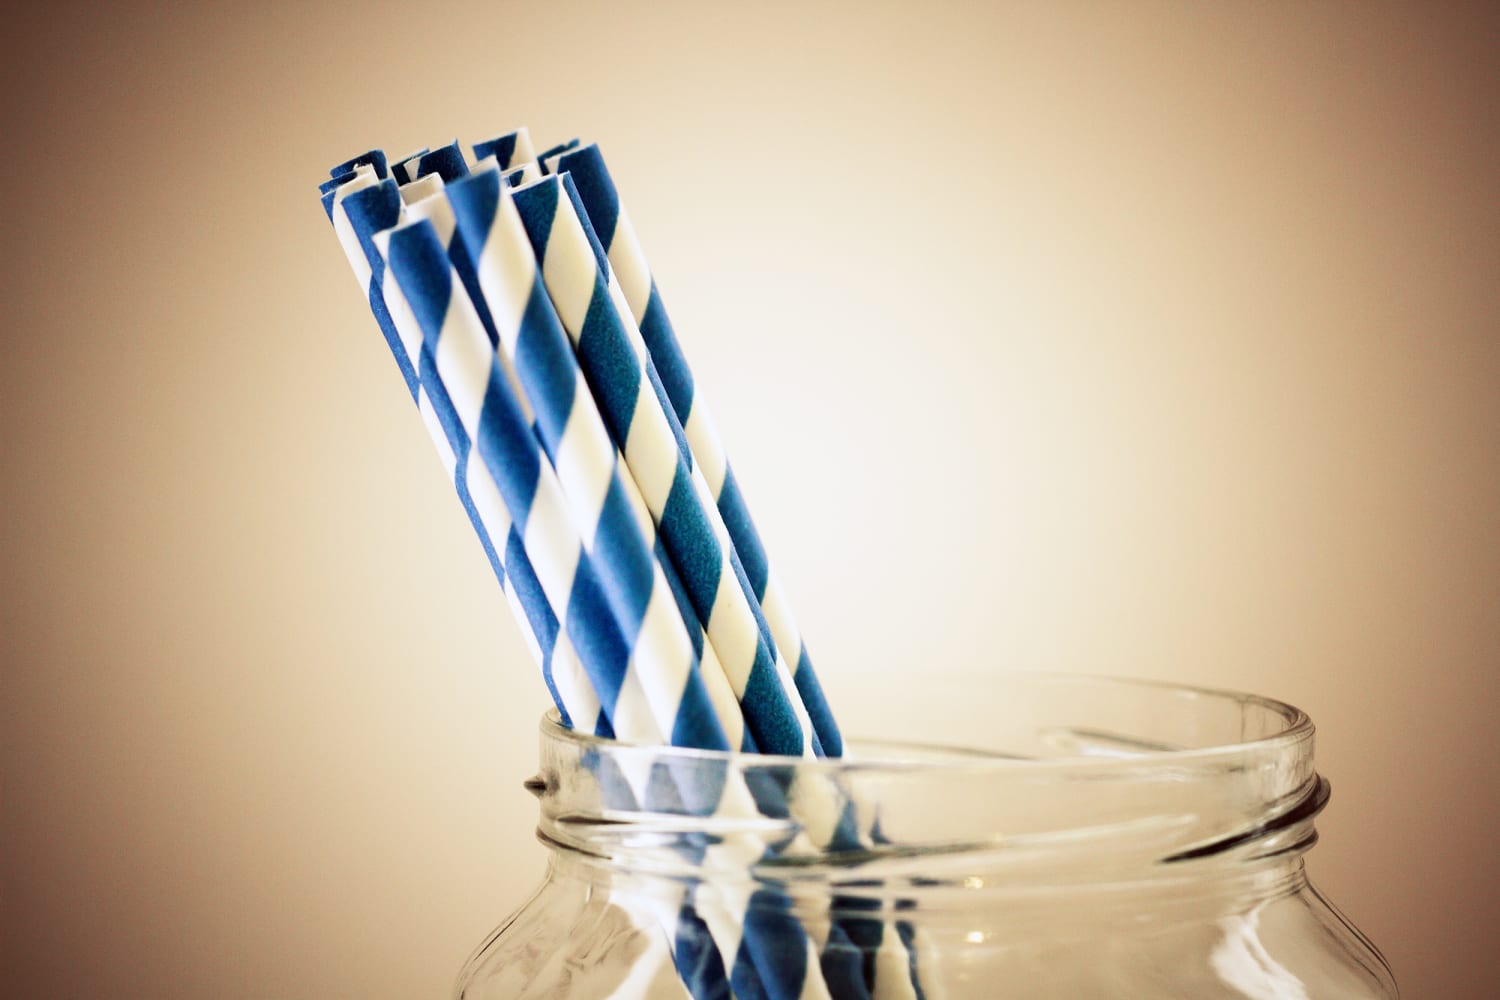 Steel My Straws - Stainless Steel Straws For Ocean Conservation